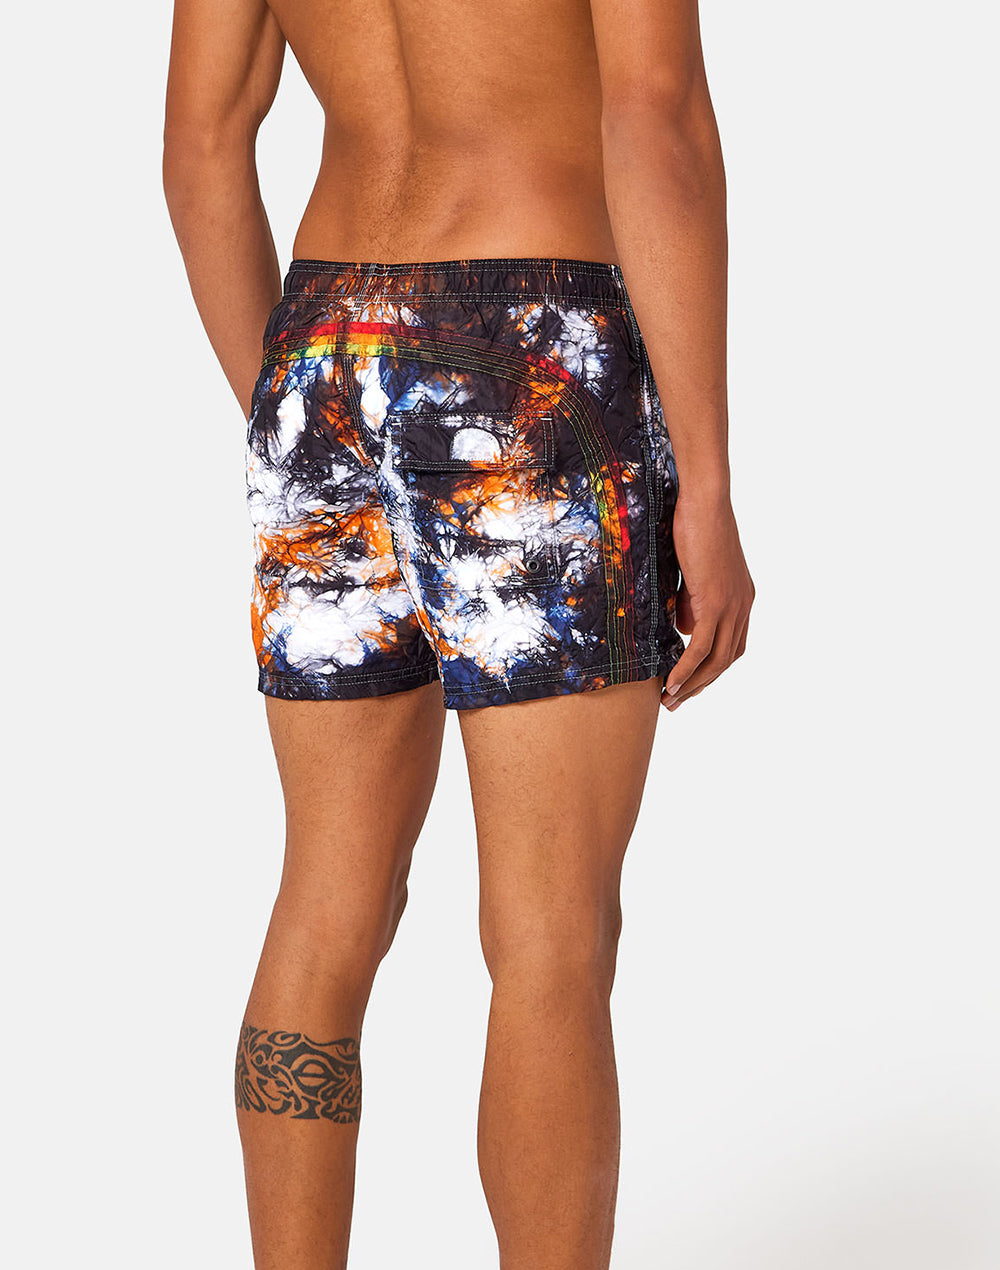 SHORT SWIM SHORTS WITH AN ELASTICATED WAISTBAND -  GOLDENWAVE SPECIAL EDITION